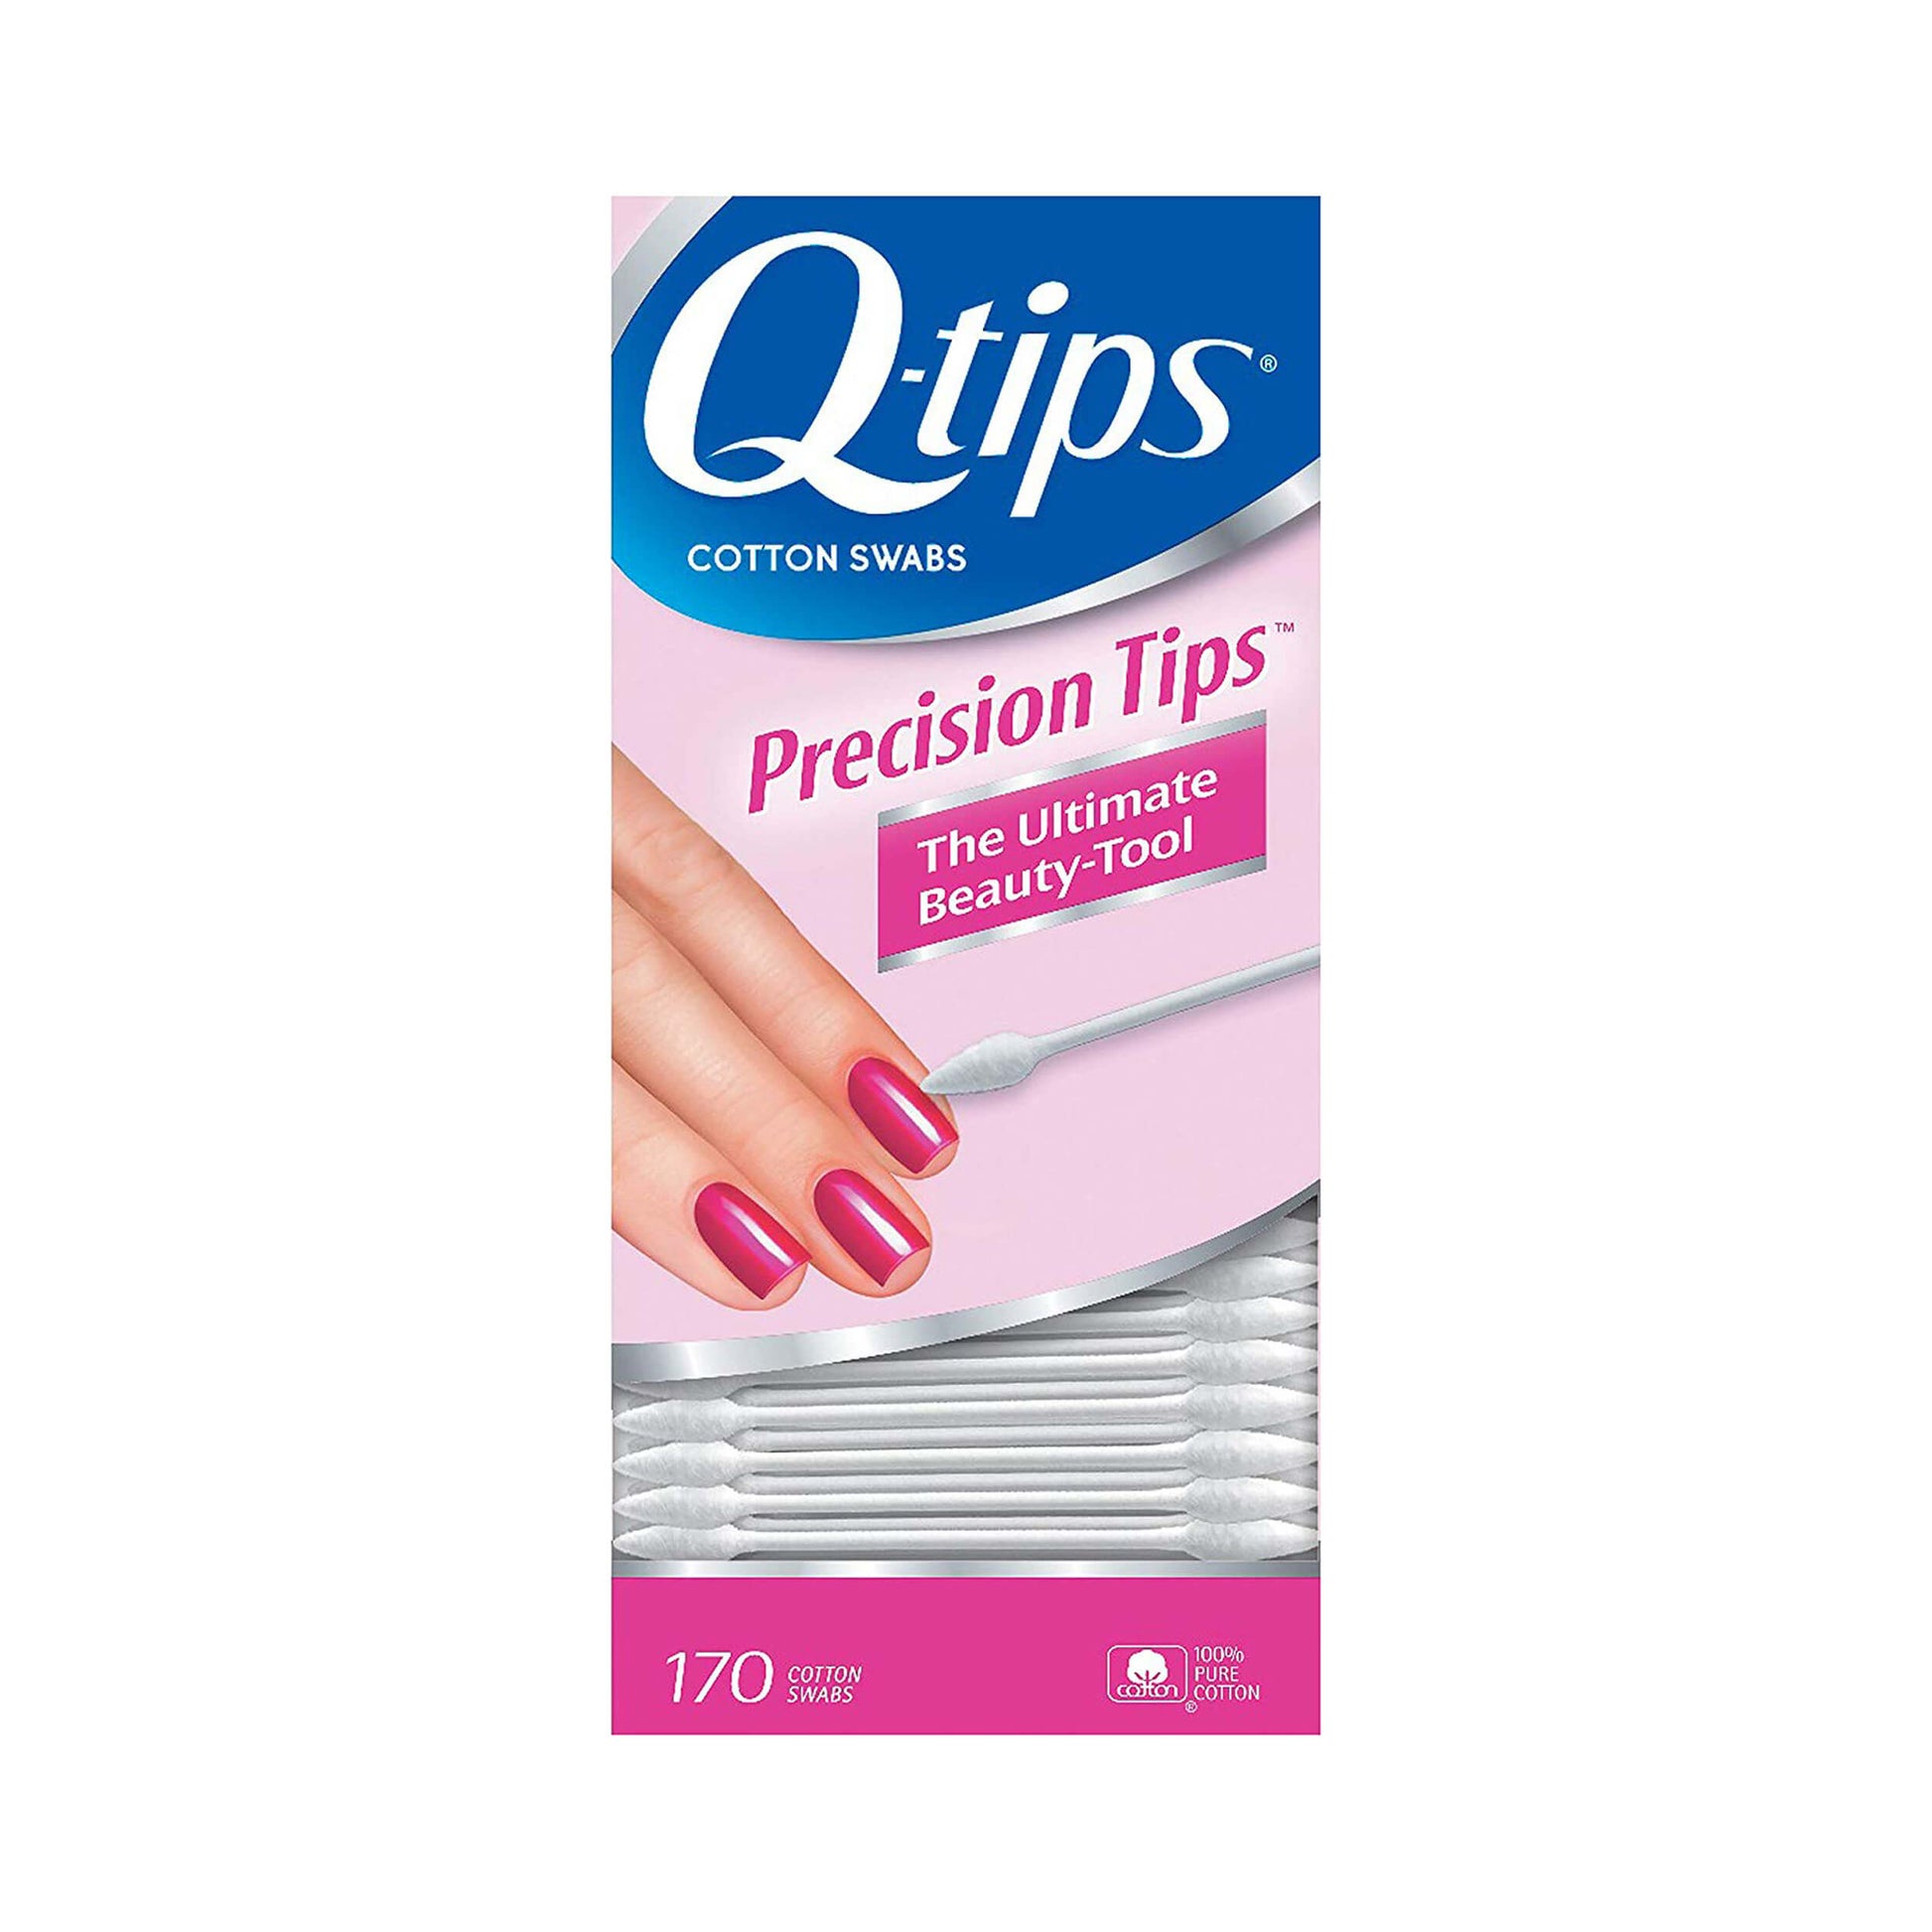 Q-tips Cotton Swabs Precision Tips 170 Ct